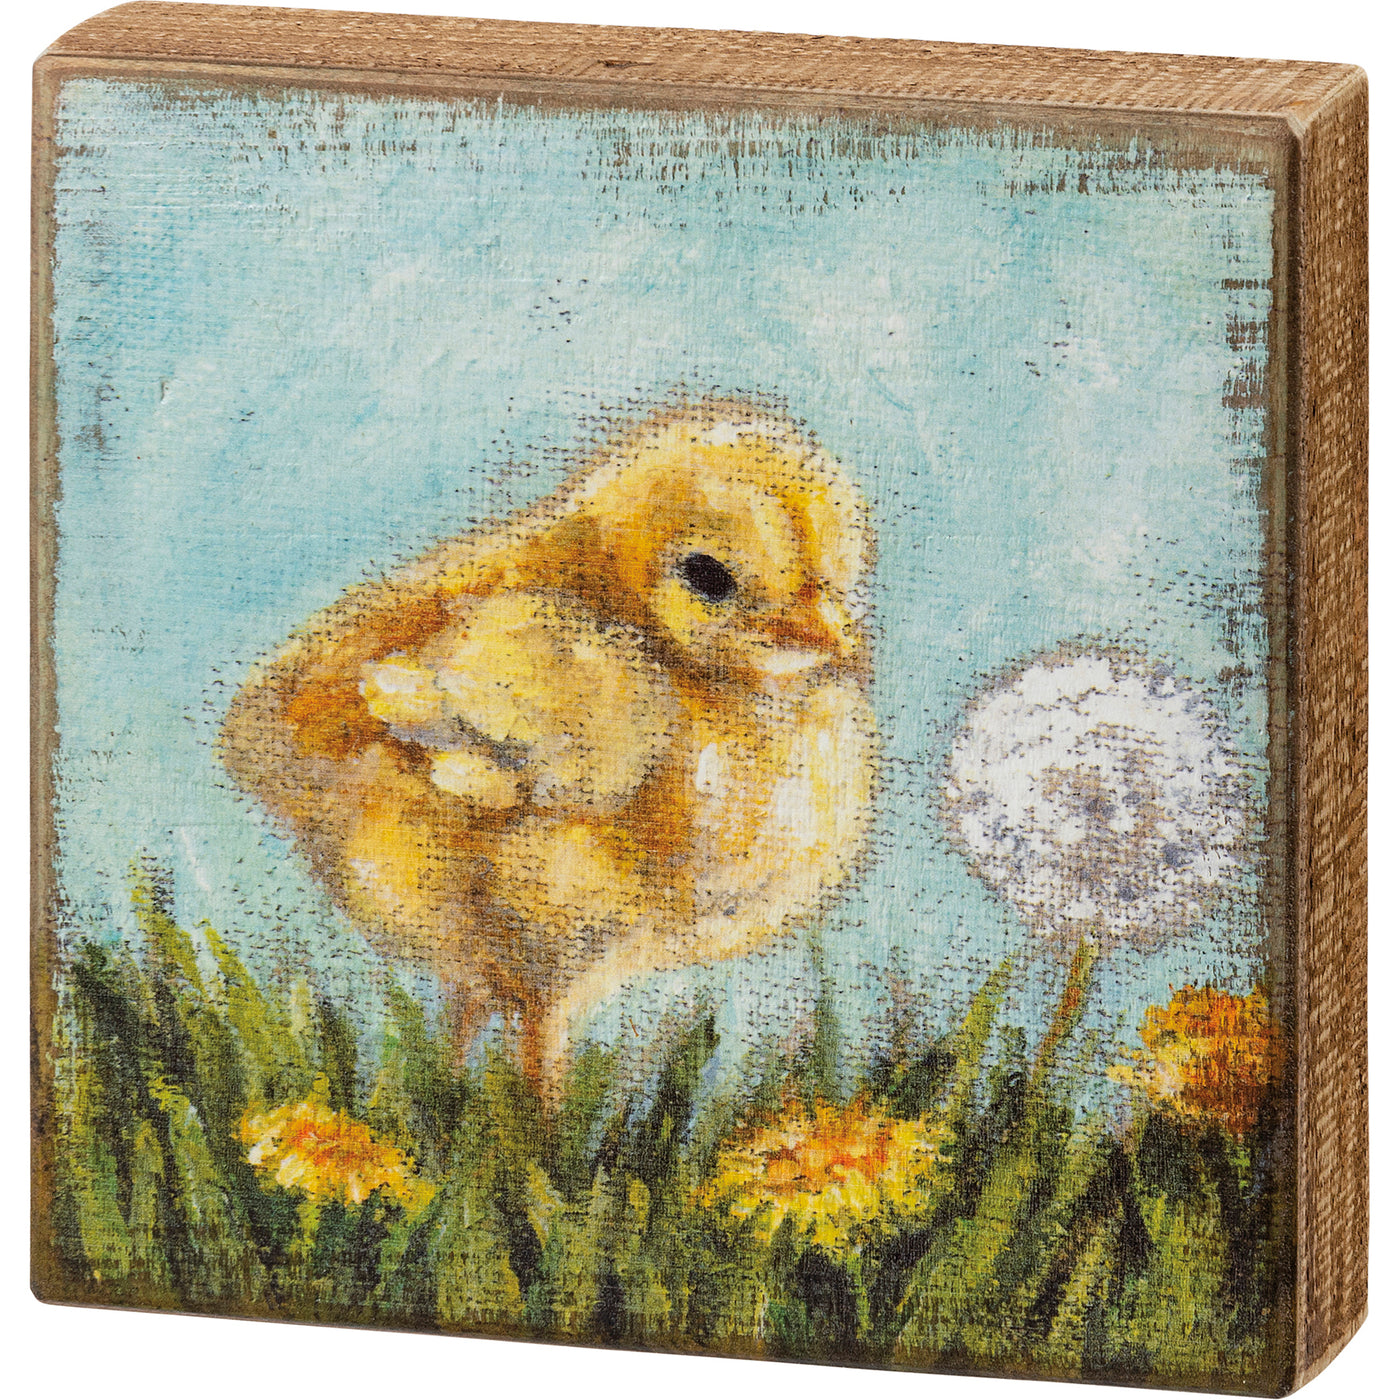 Surprise Me Sale 🤭 Baby Chick with Dandelions Wooden Box Sign